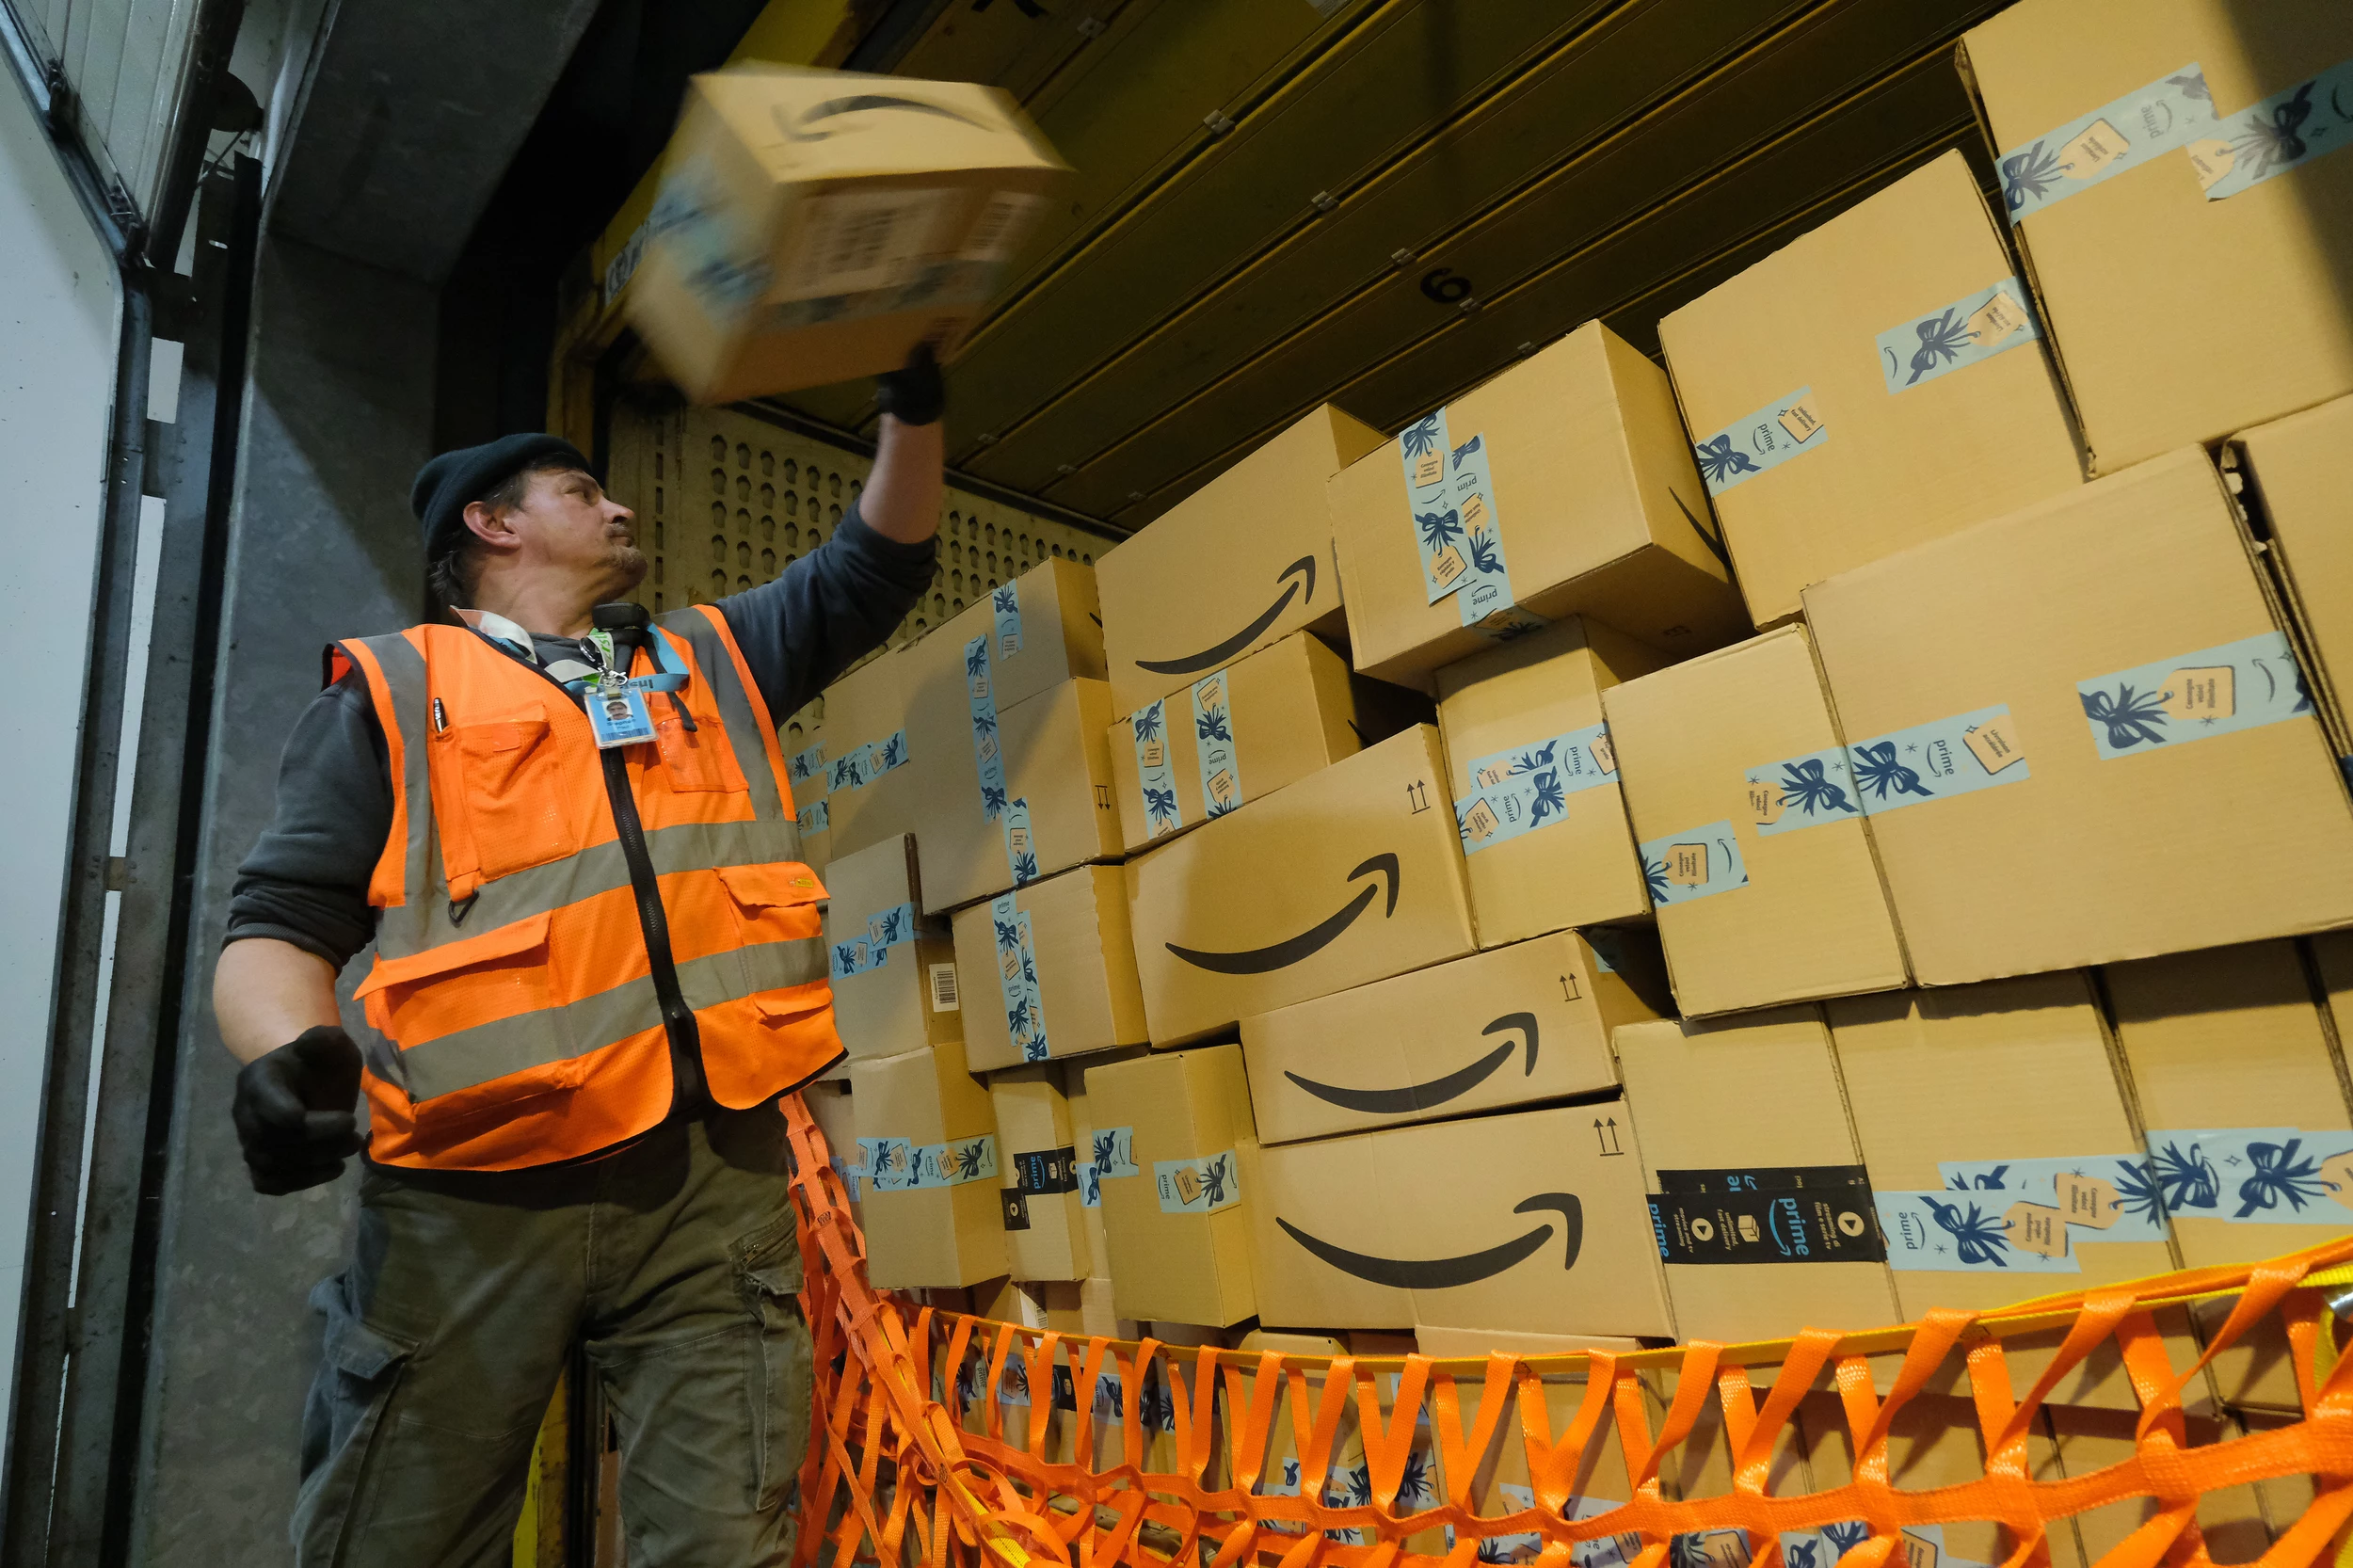 Amazon Is Closing Projects Across the USA, Idaho Affected